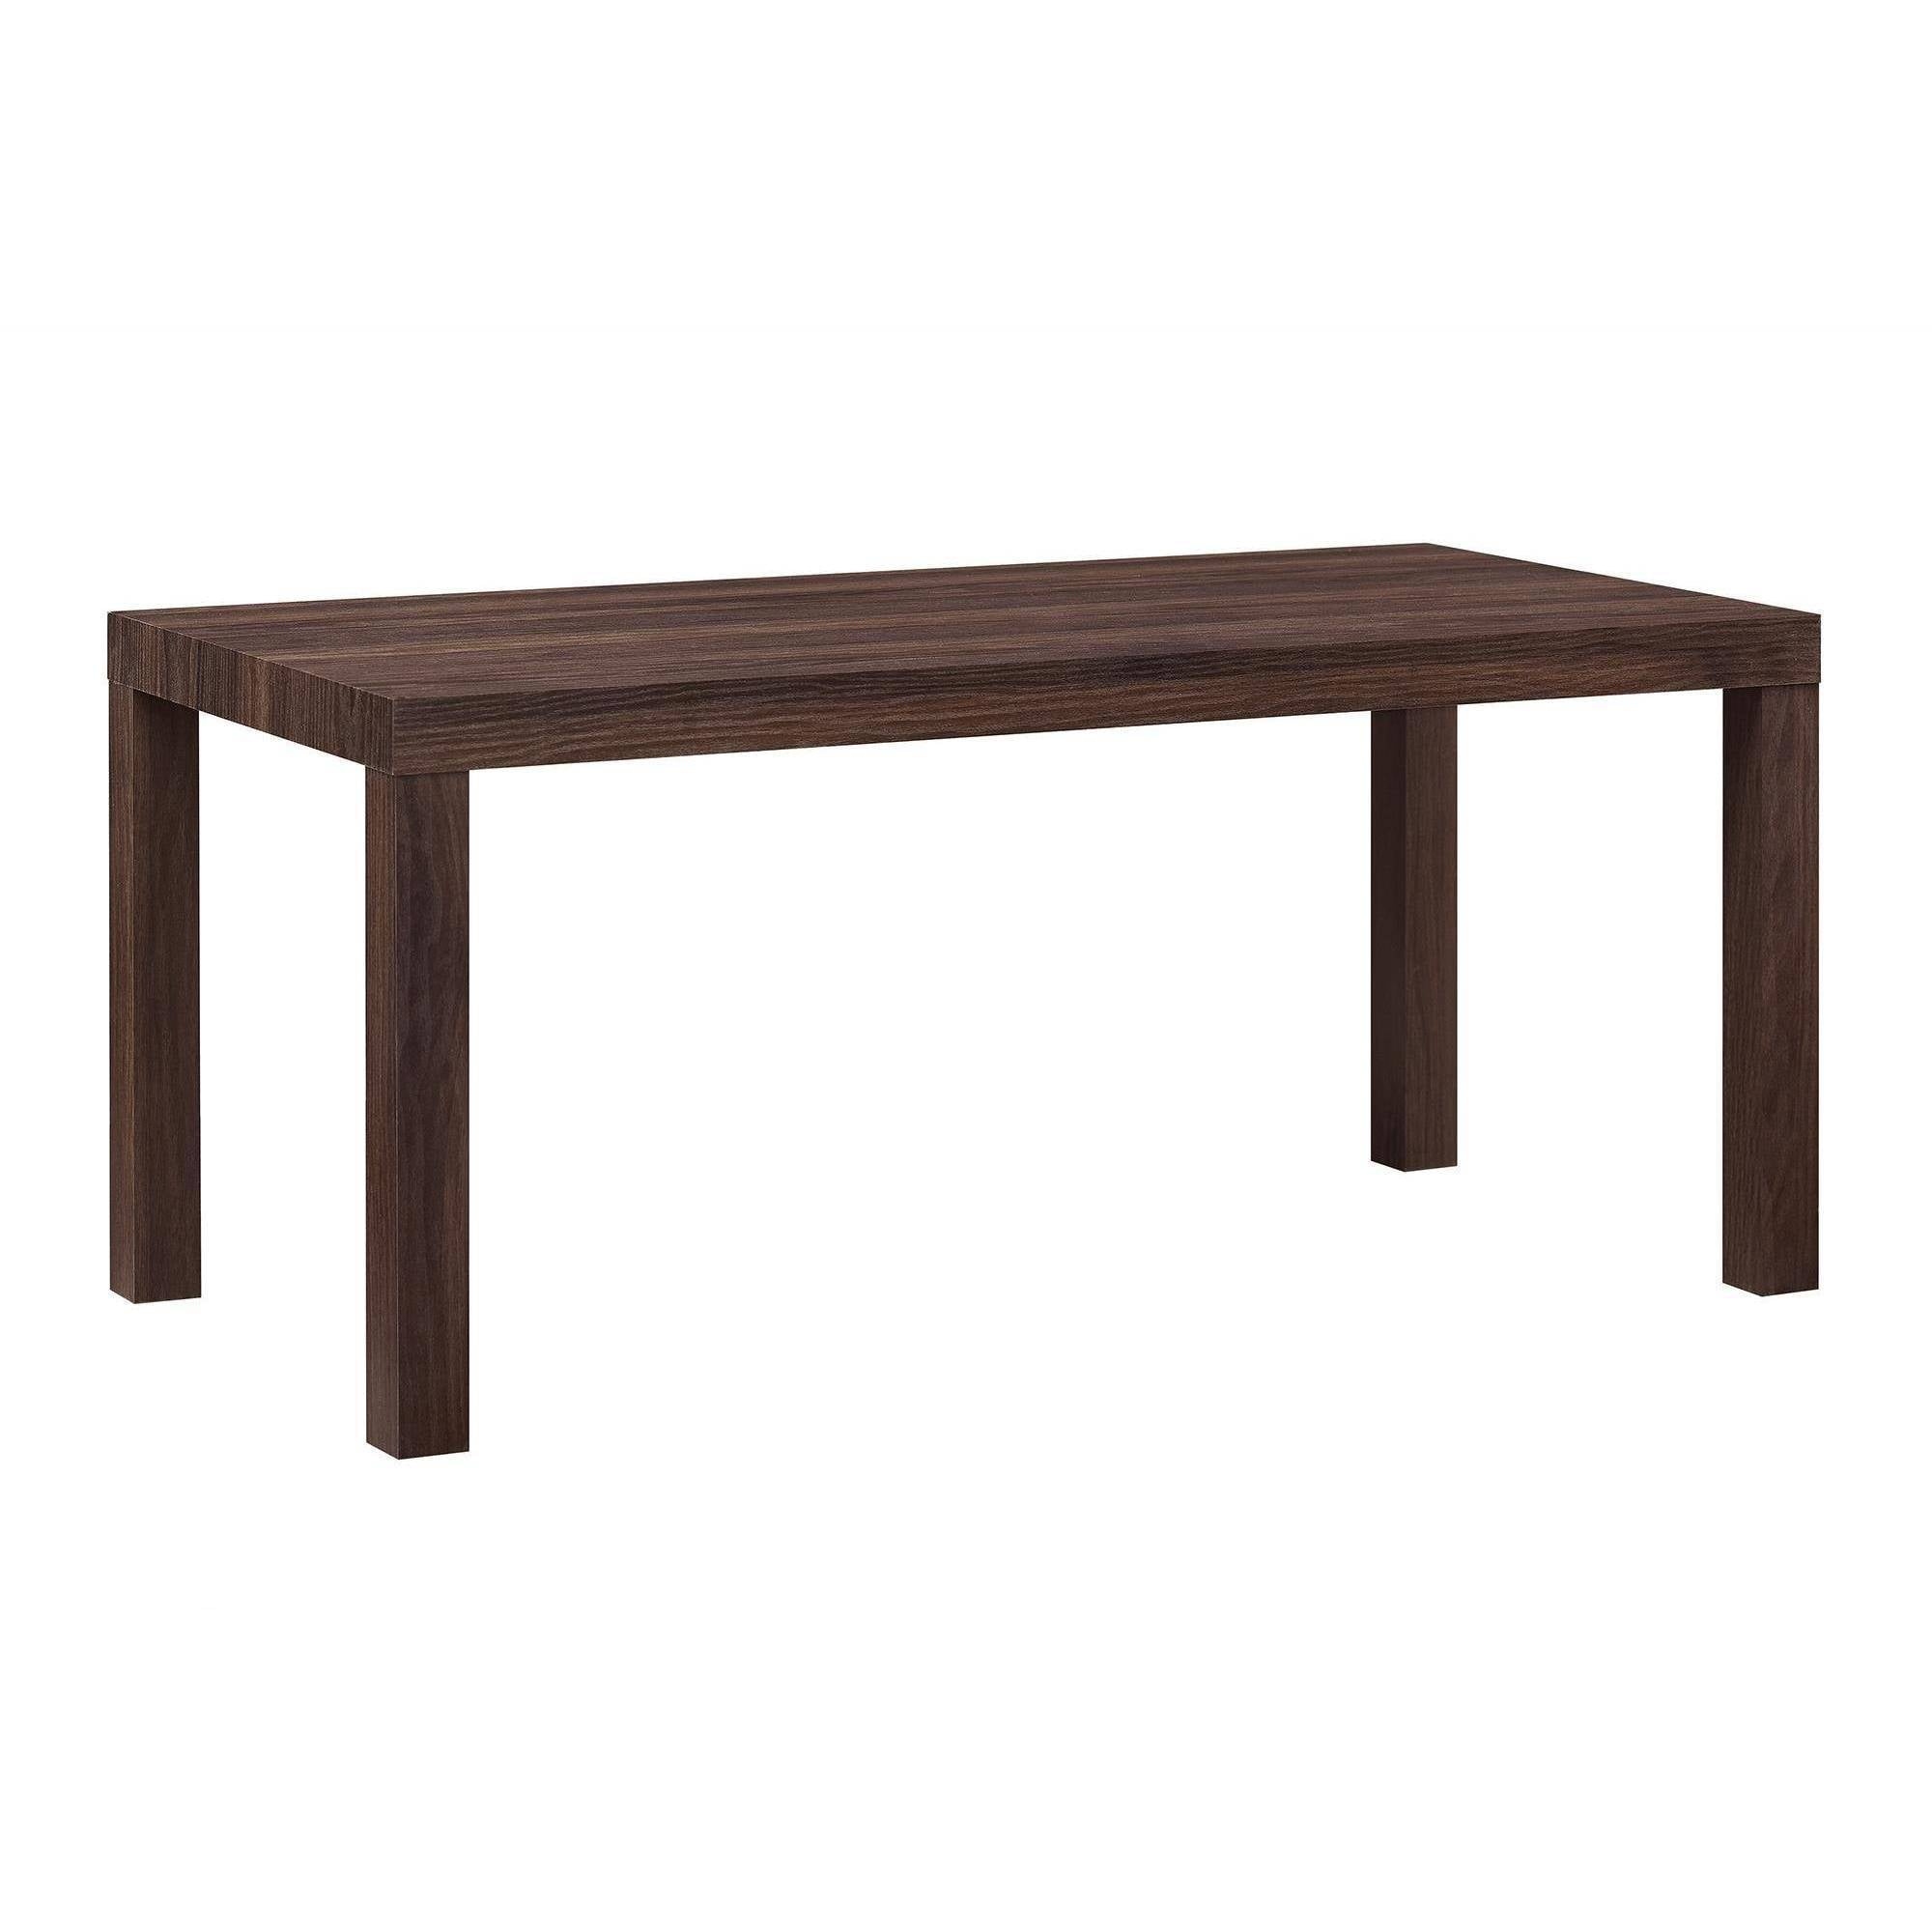 Mainstays Parsons Coffee Table, Lightweight, Multiple Colors - Walmart